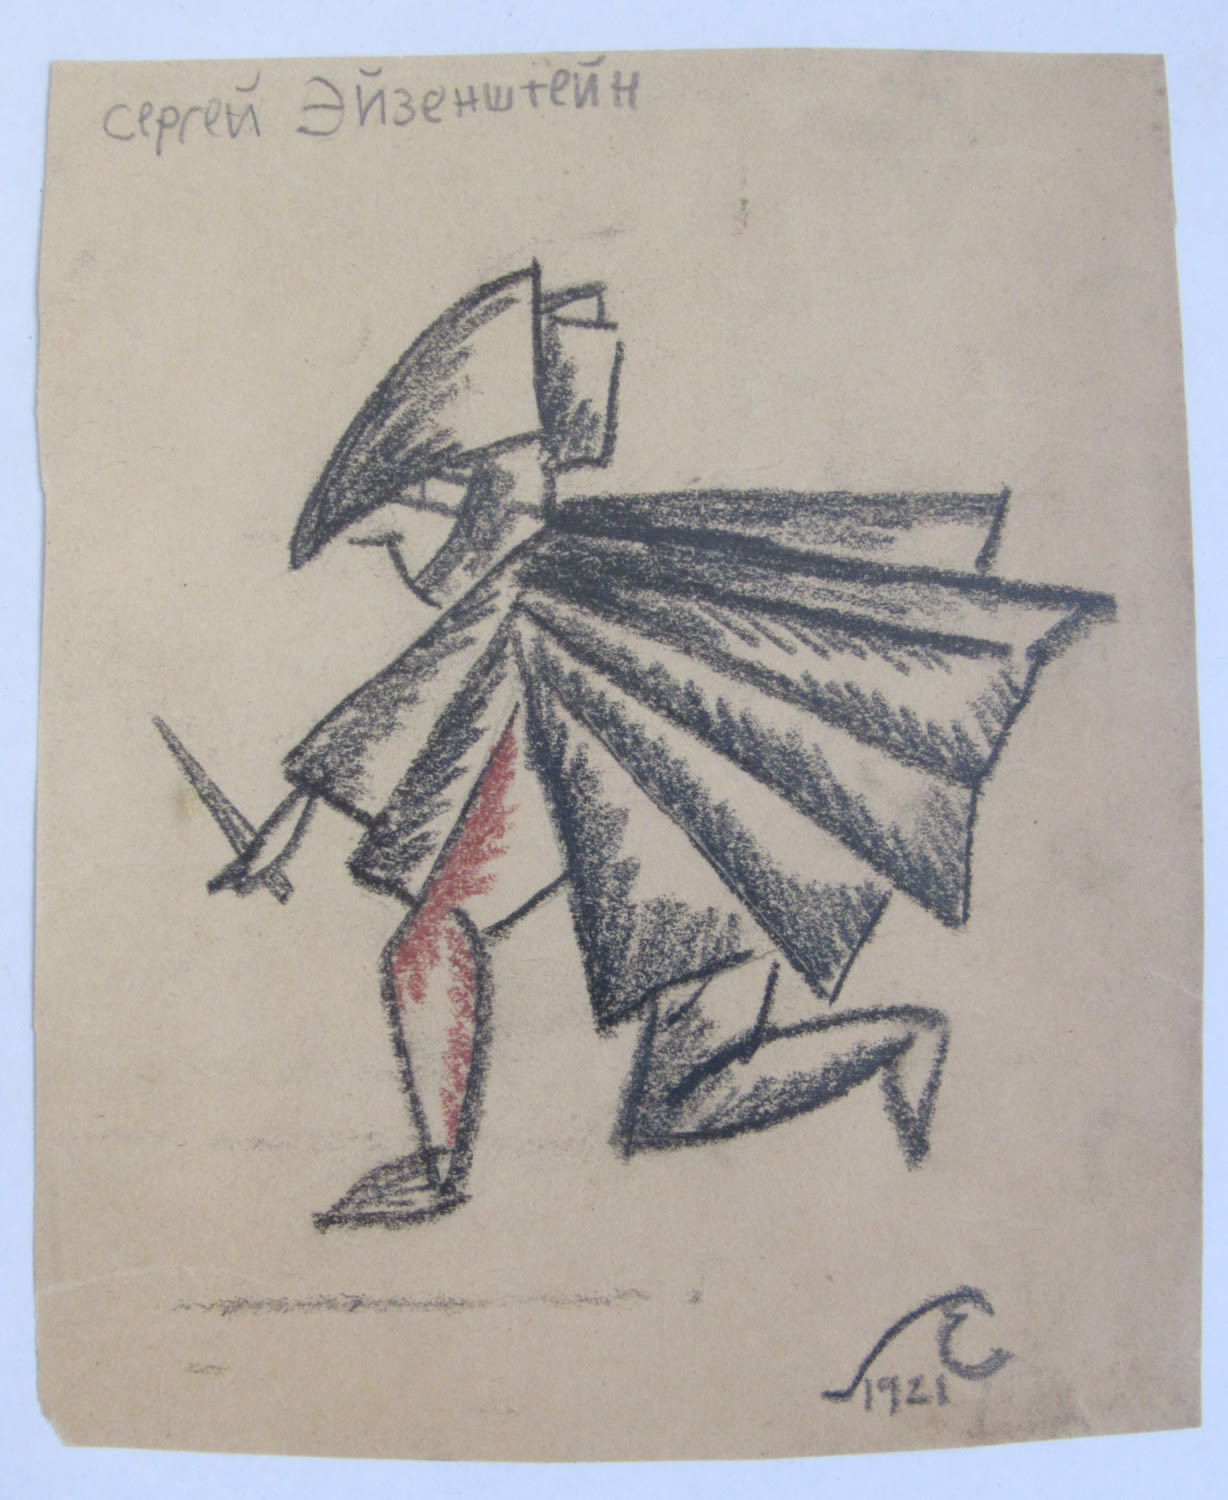 Sergei Eisenstein - Knight - pencil and charcoal on paper - 14x11 cm